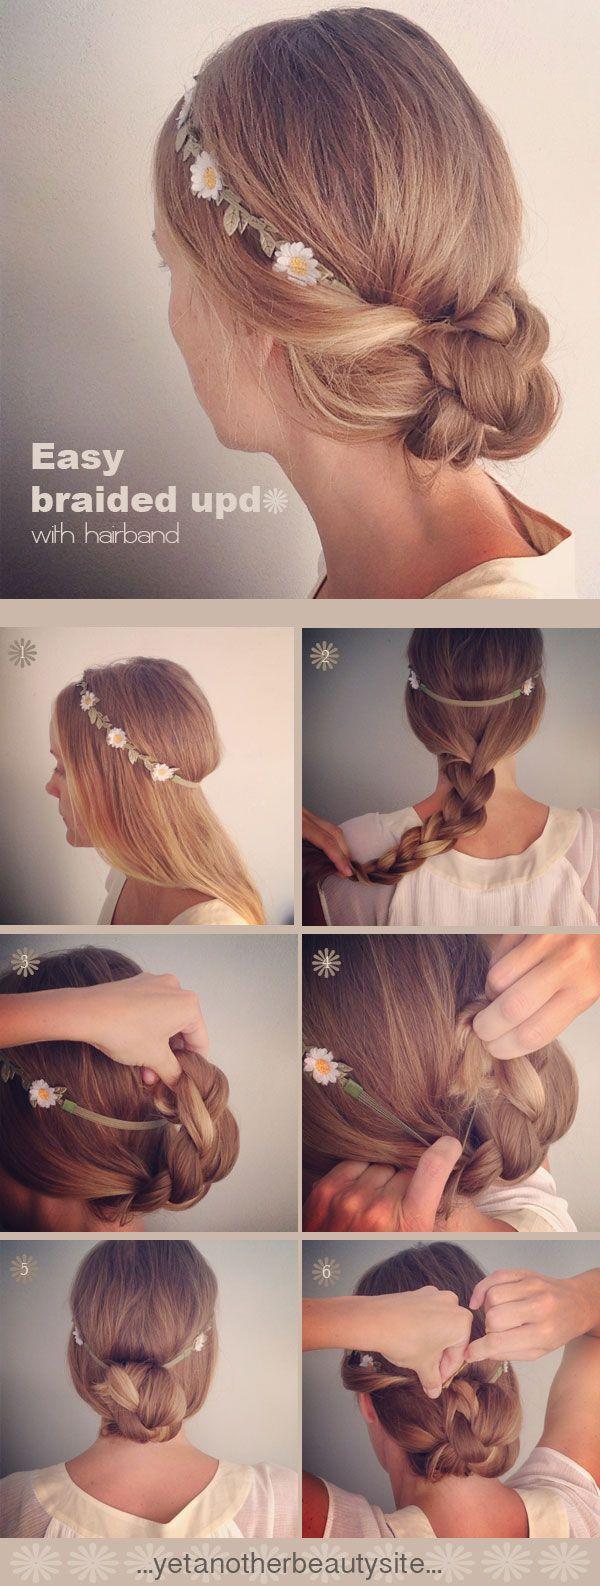 Hochzeit - 20 DIY Wedding Hairstyles With Tutorials To Try On Your Own